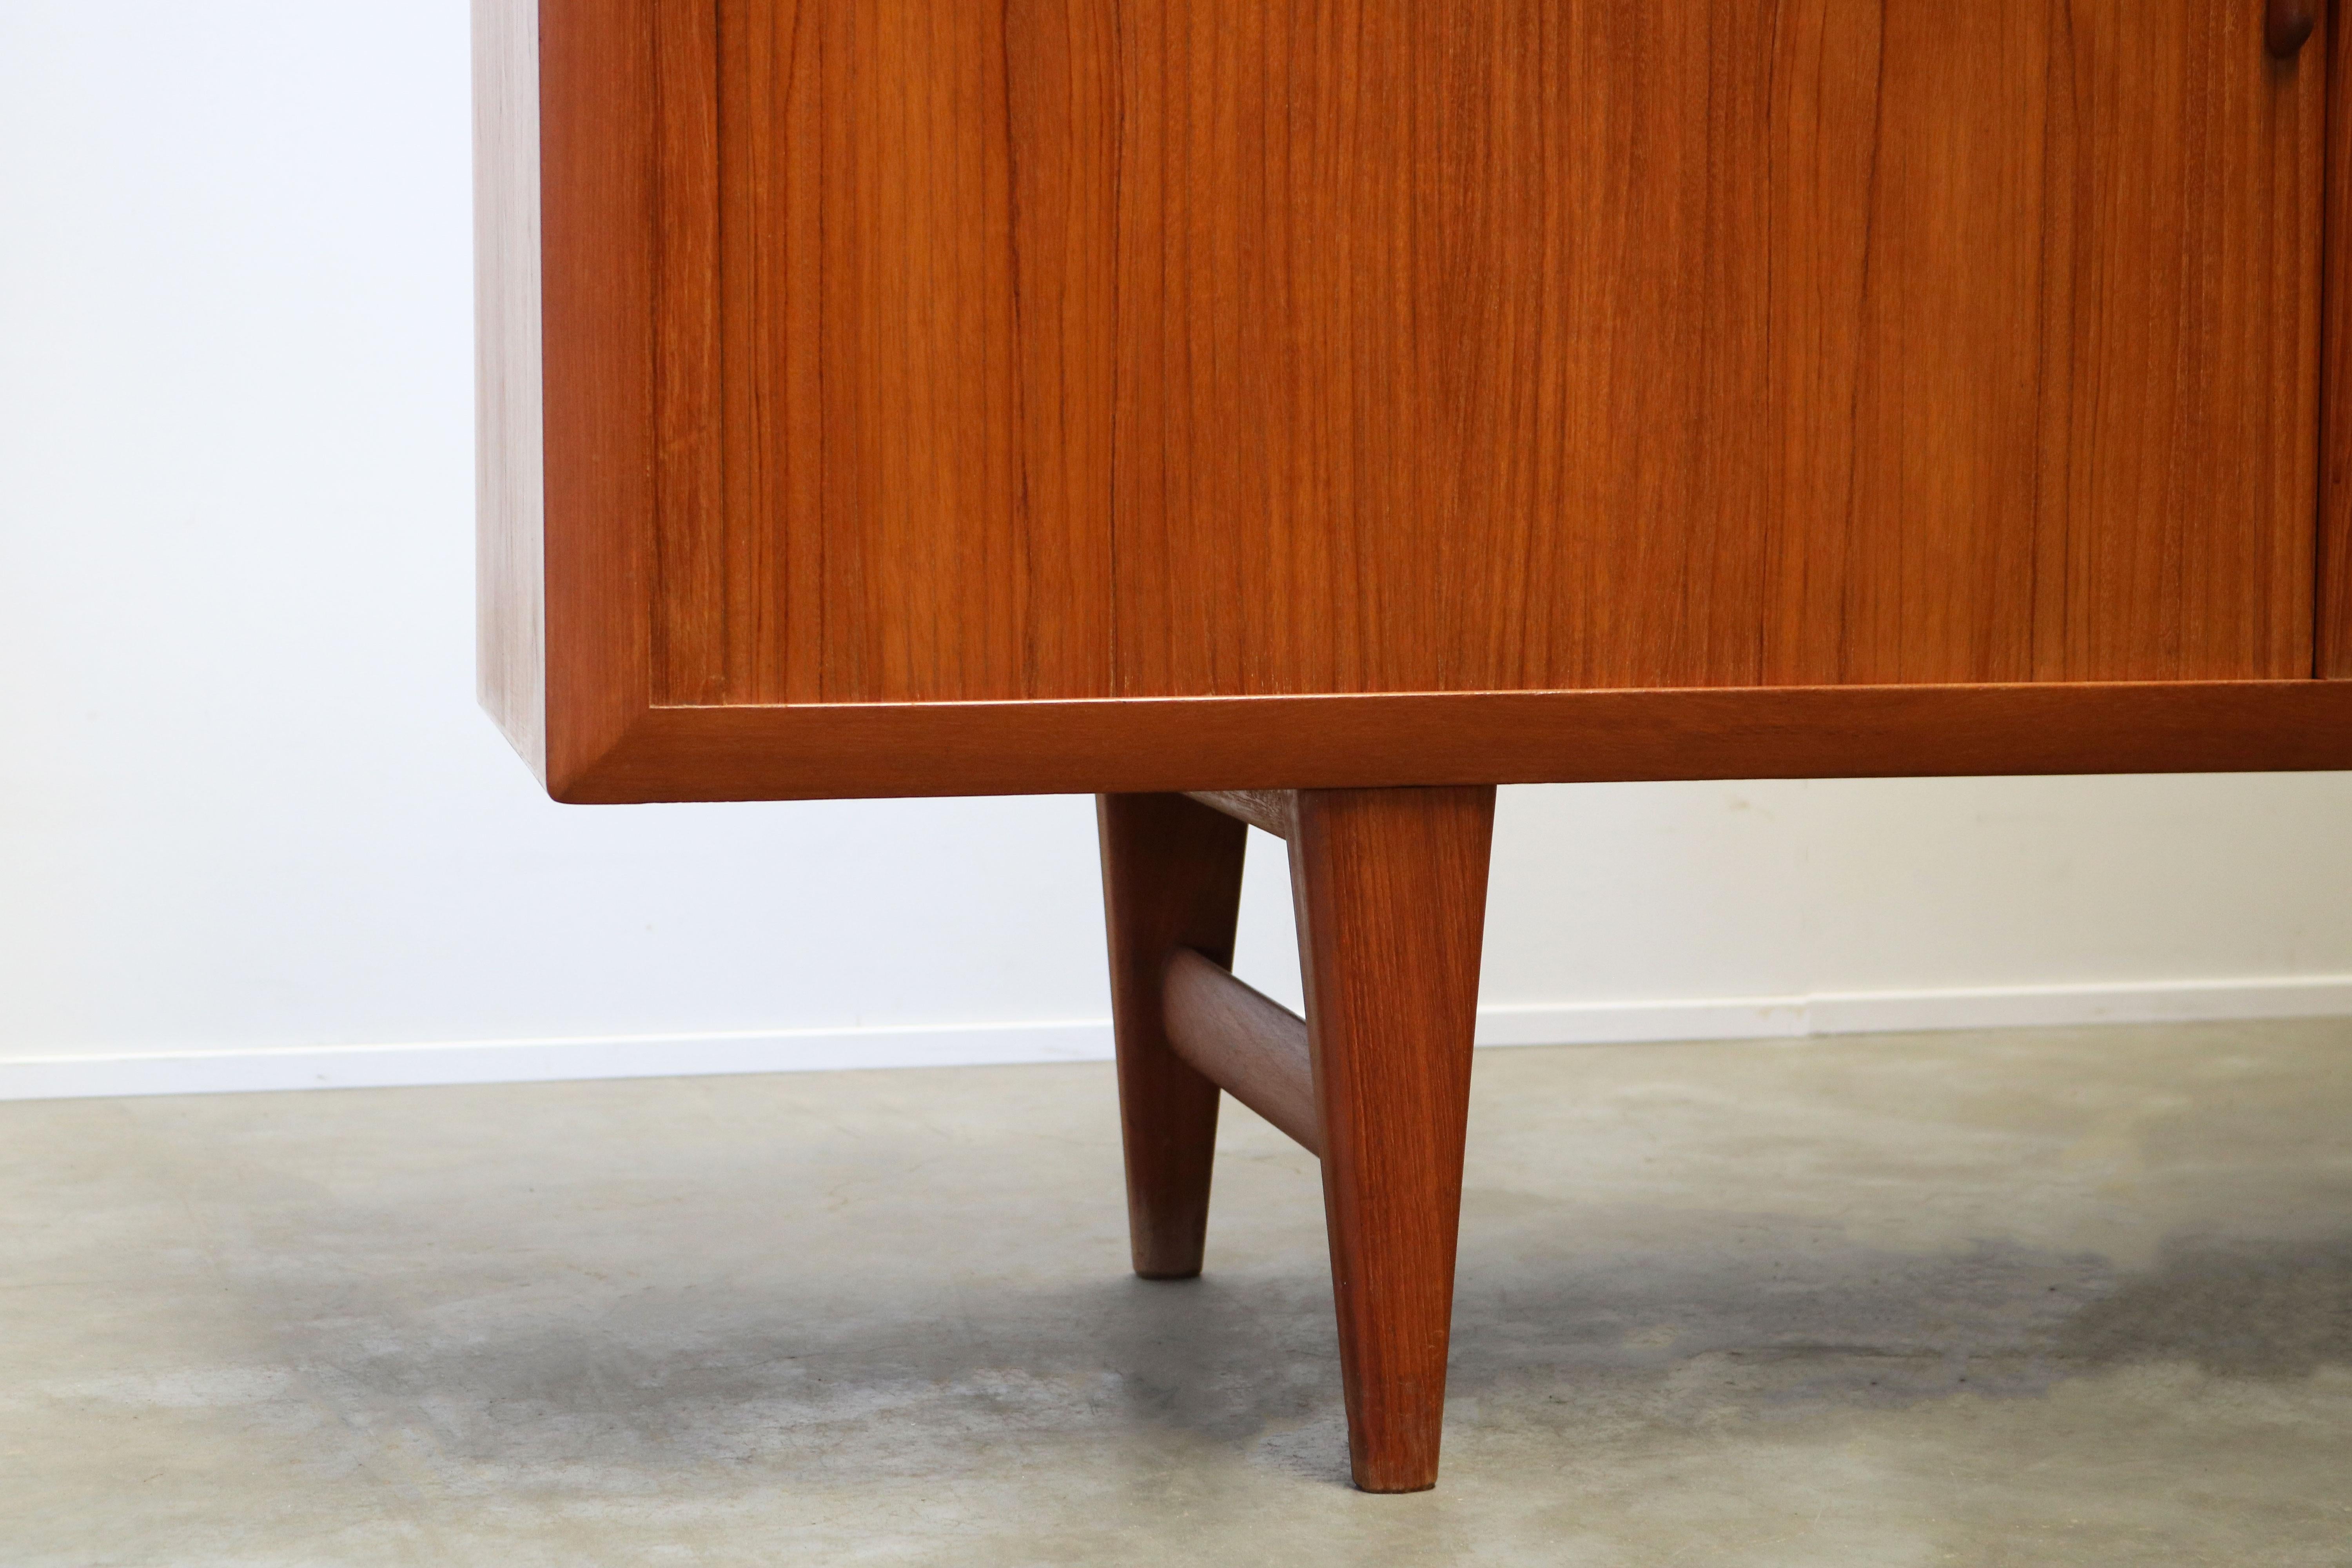 Mid-20th Century Rare Danish Sideboard / Credenza by Ib Kofod Larsen for Faarup Teak 1950s Brown